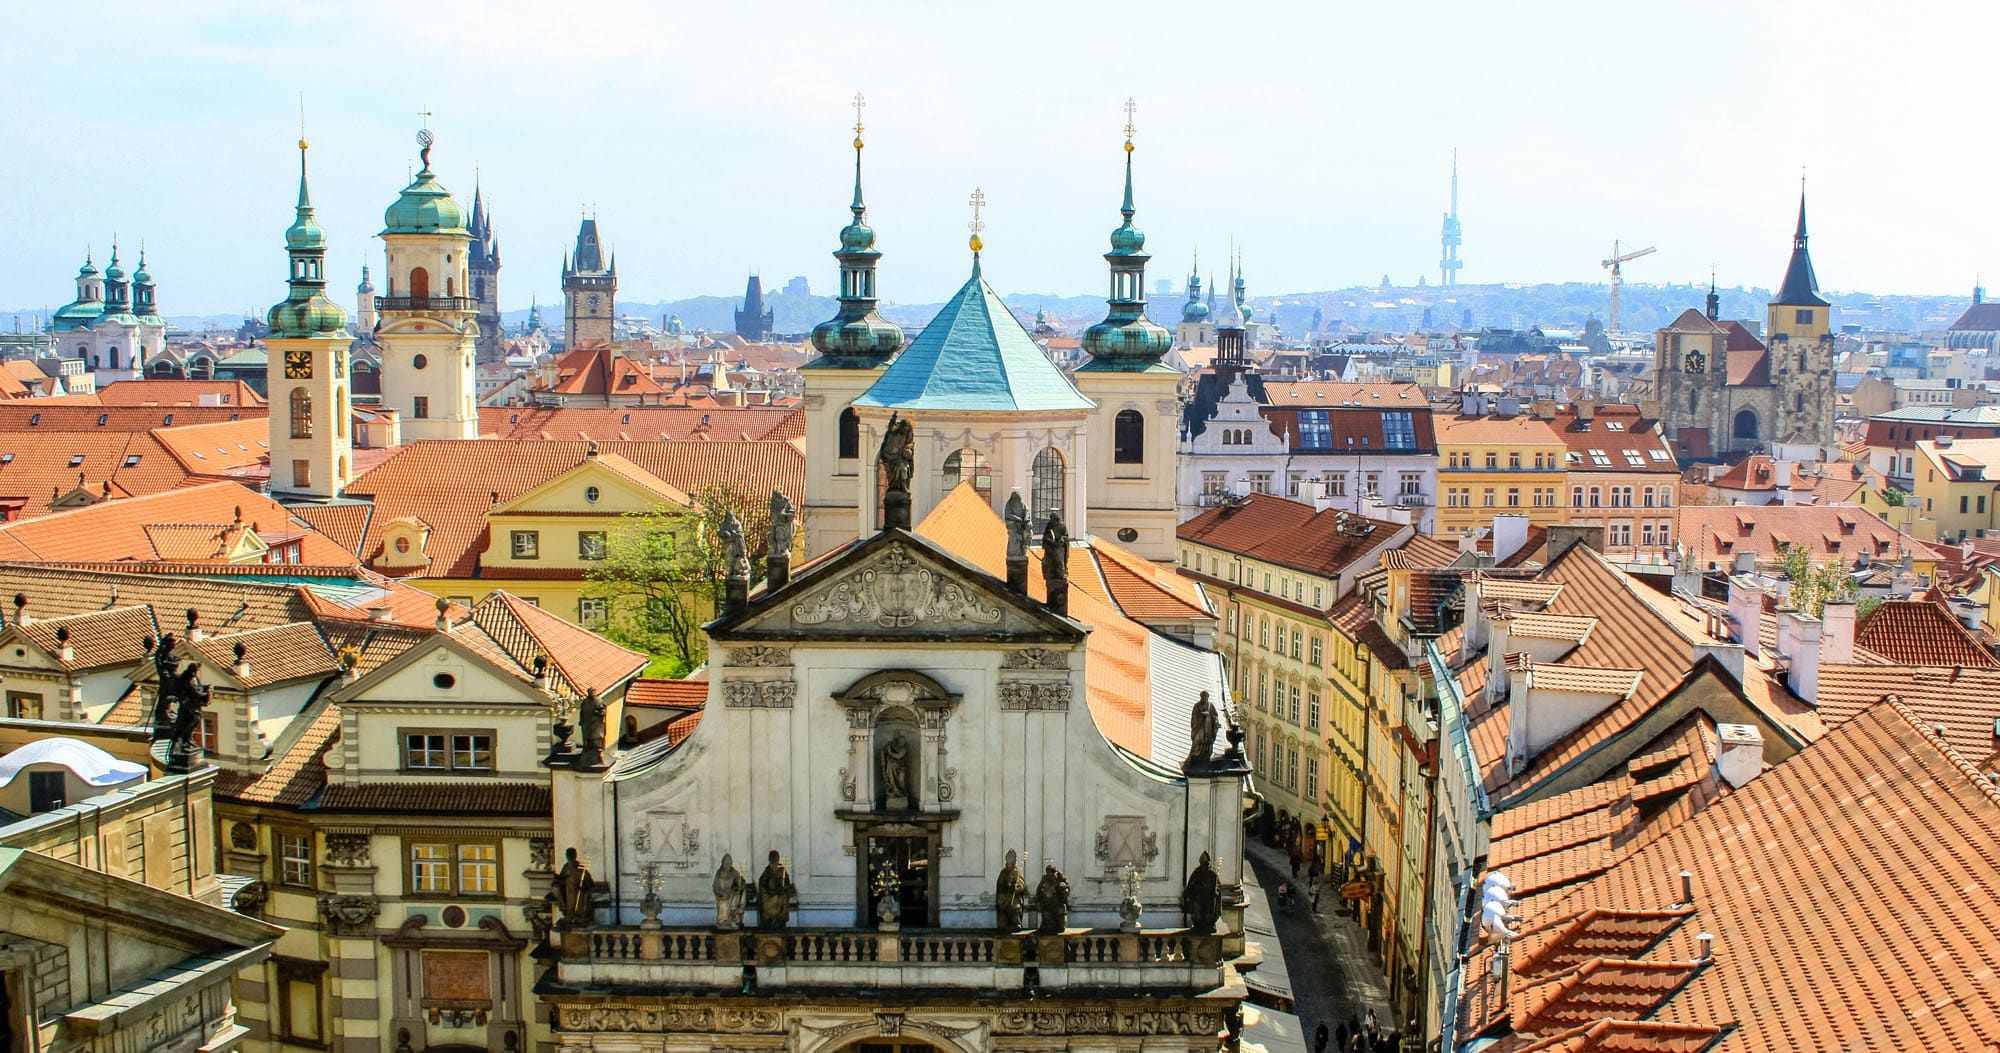 Featured image for “Best Views of Prague: 10 Iconic Photography Locations (+ Map & Photos)”